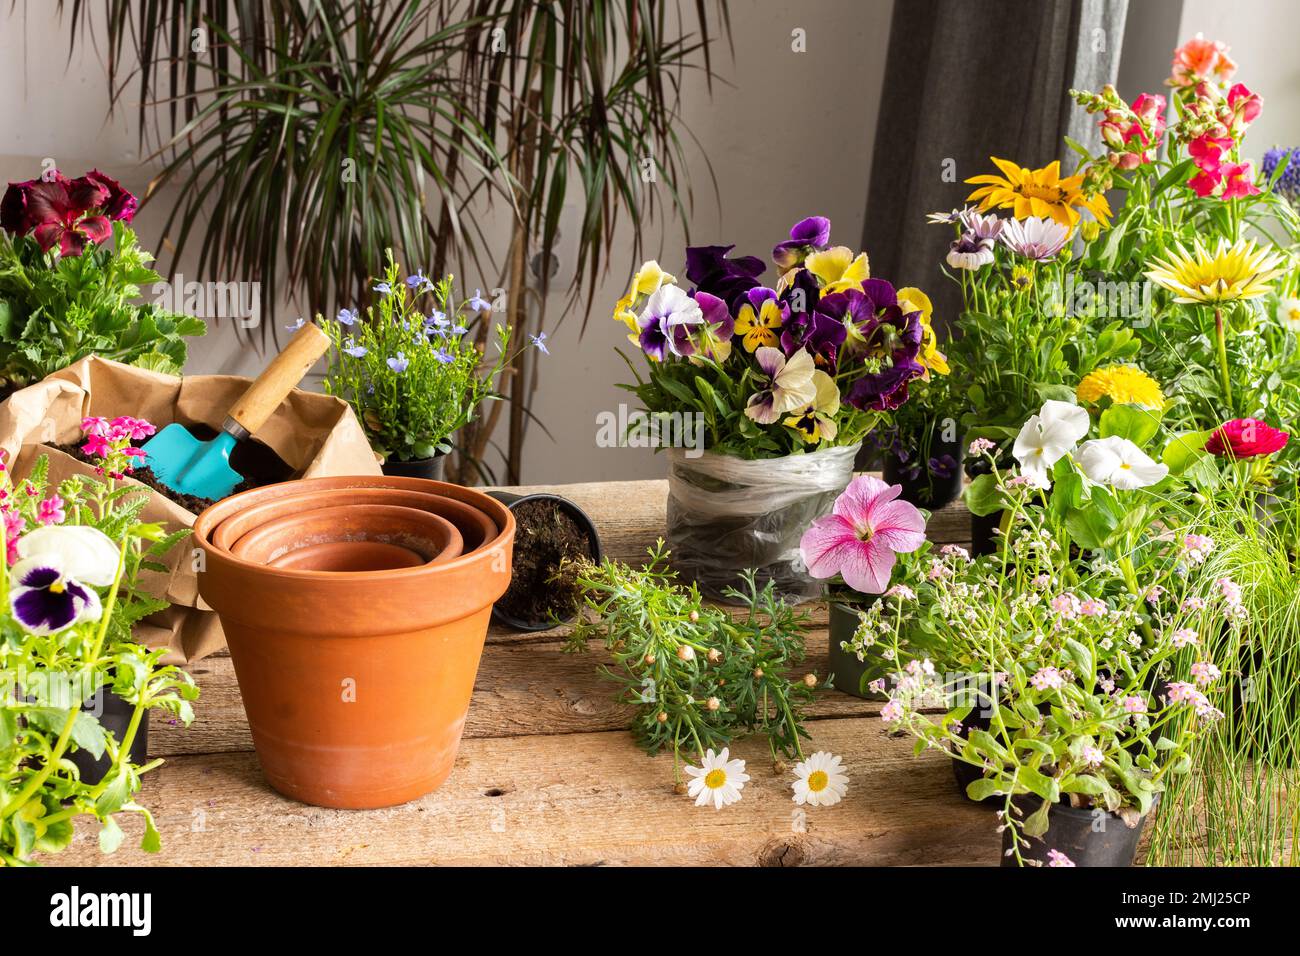 Spring decoration of a home balcony or terrace with flowers, transplanting  flowers from temporary pots to permanent ones, home gardening and hobbies  Stock Photo - Alamy